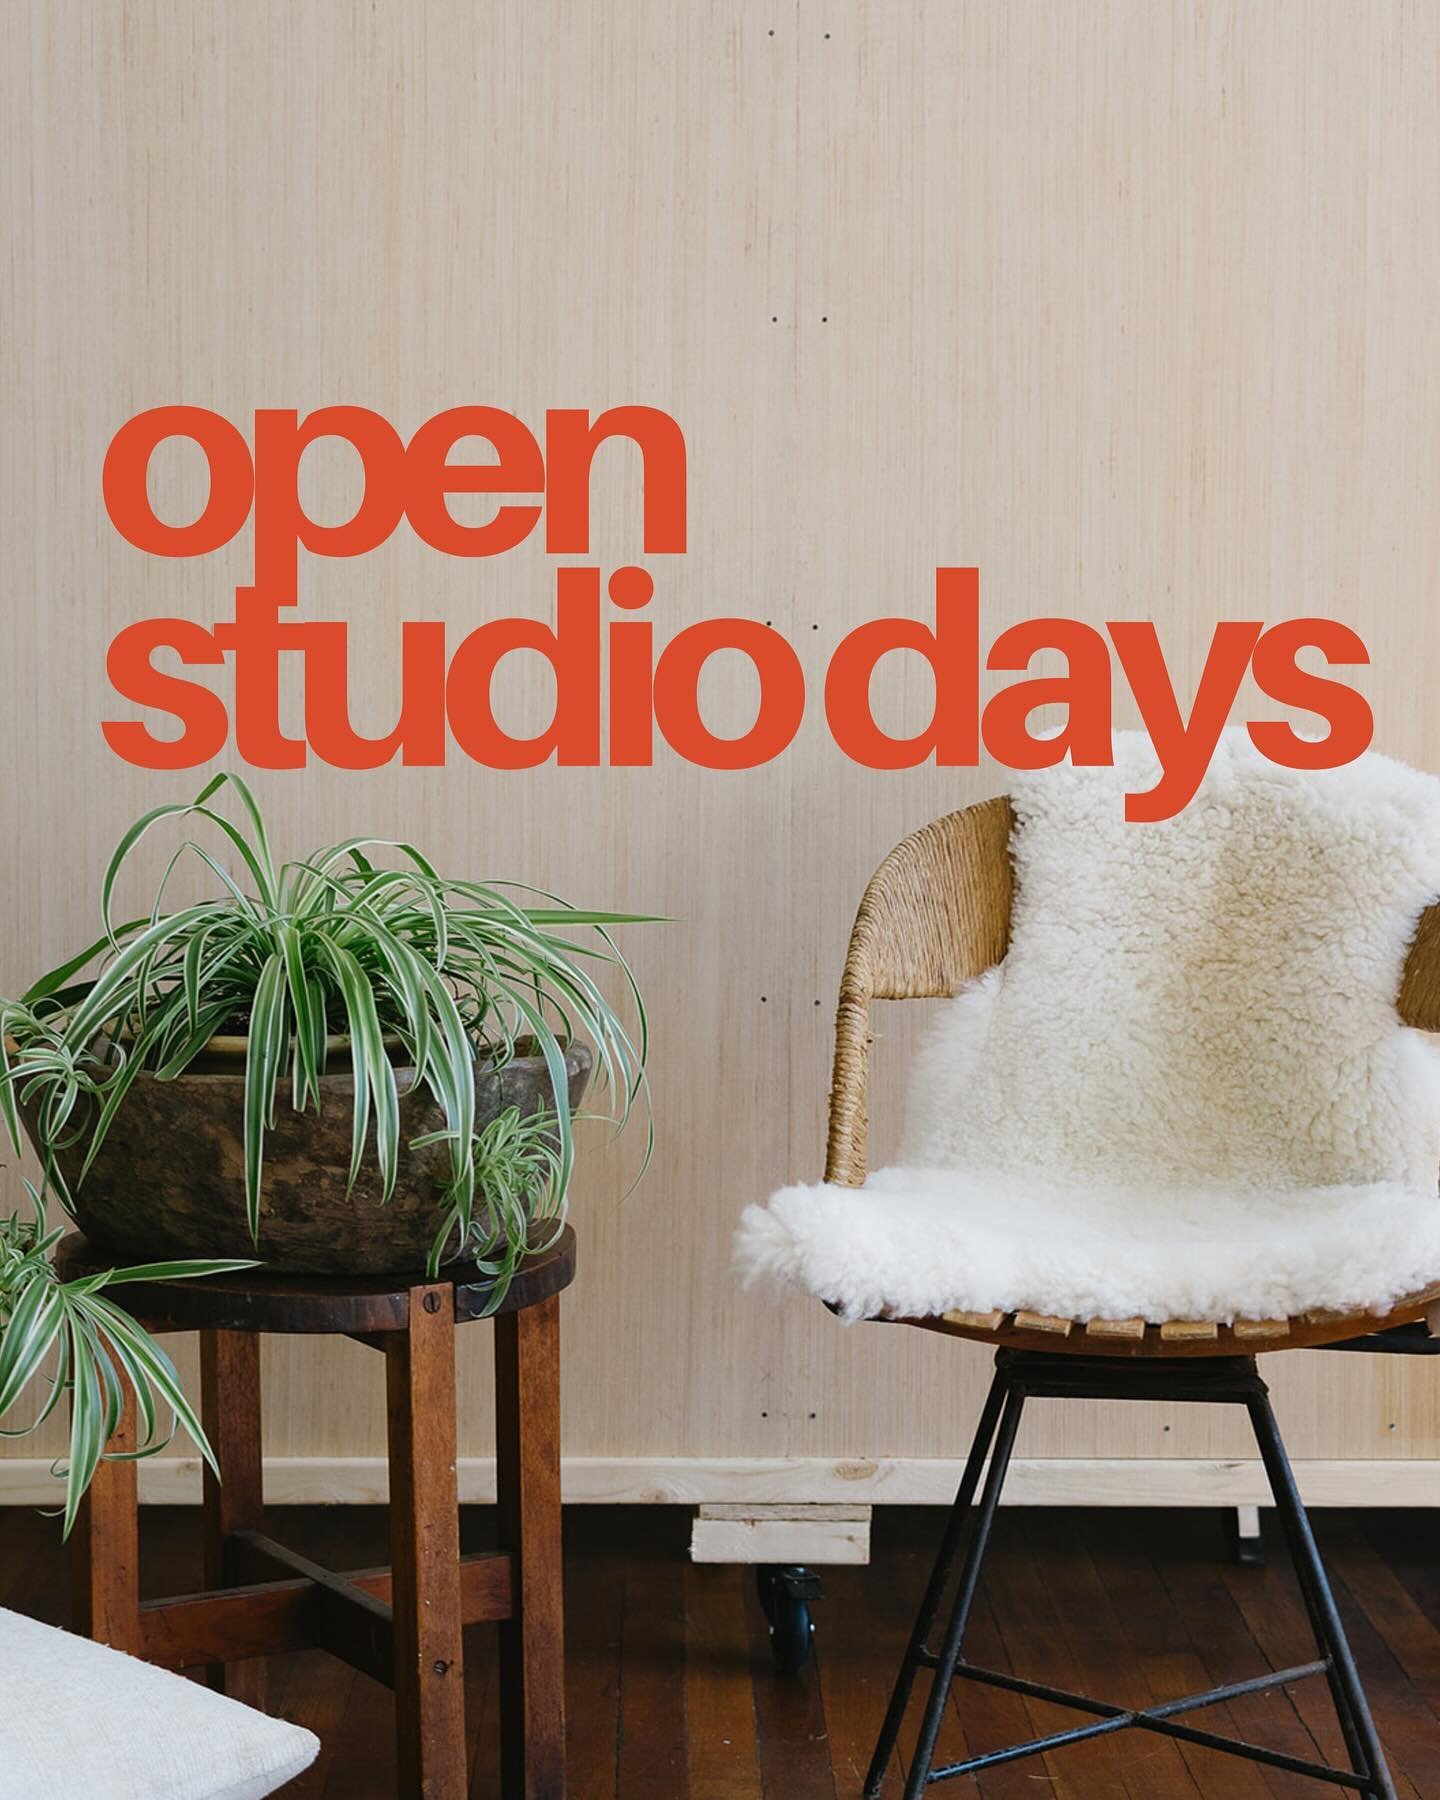 In honor of our 1 YEAR of being in business, come CELEBRATE with us at our Open Studio MINI DAYS! Happening May 11th-23th ✨ This is the perfect opportunity to dip your toes in the water at the studio with a mini session! Reserve a 15 minute time slot